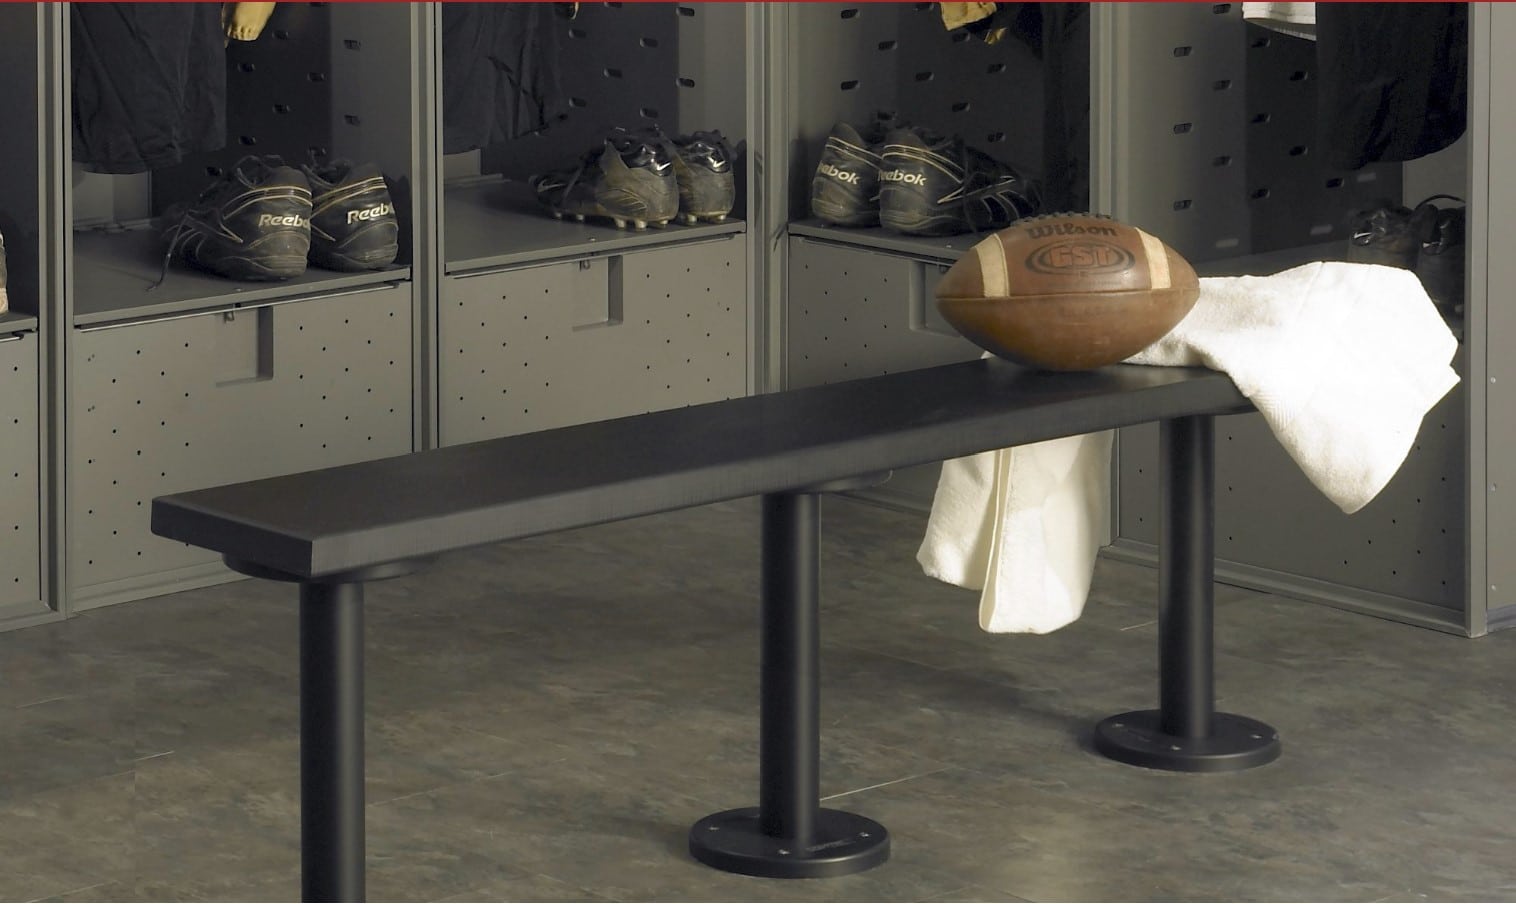 Black locker room bench with football on top of it